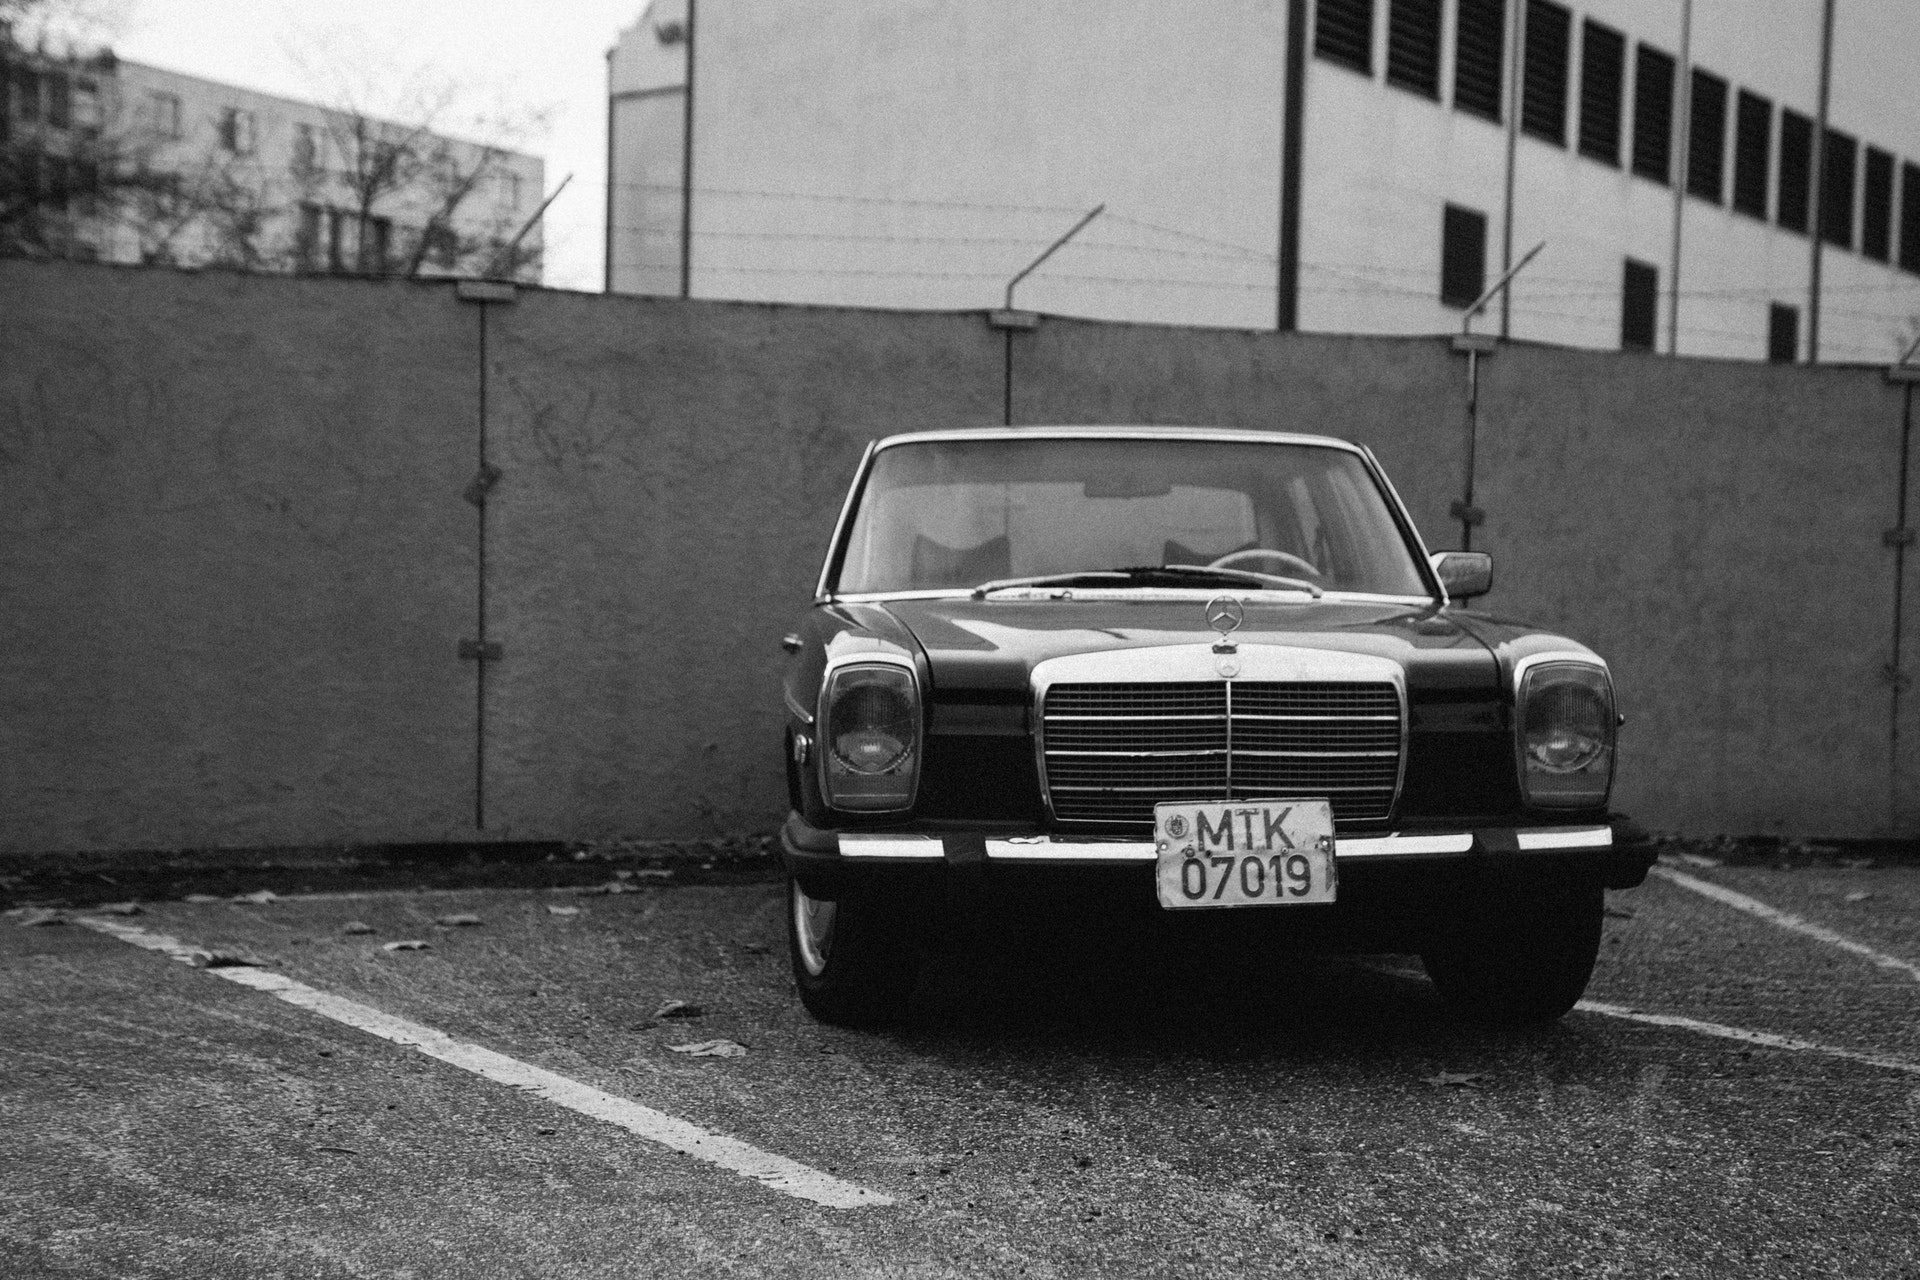 Black and white photograph of an old car in front of a cement wall with barbed wire